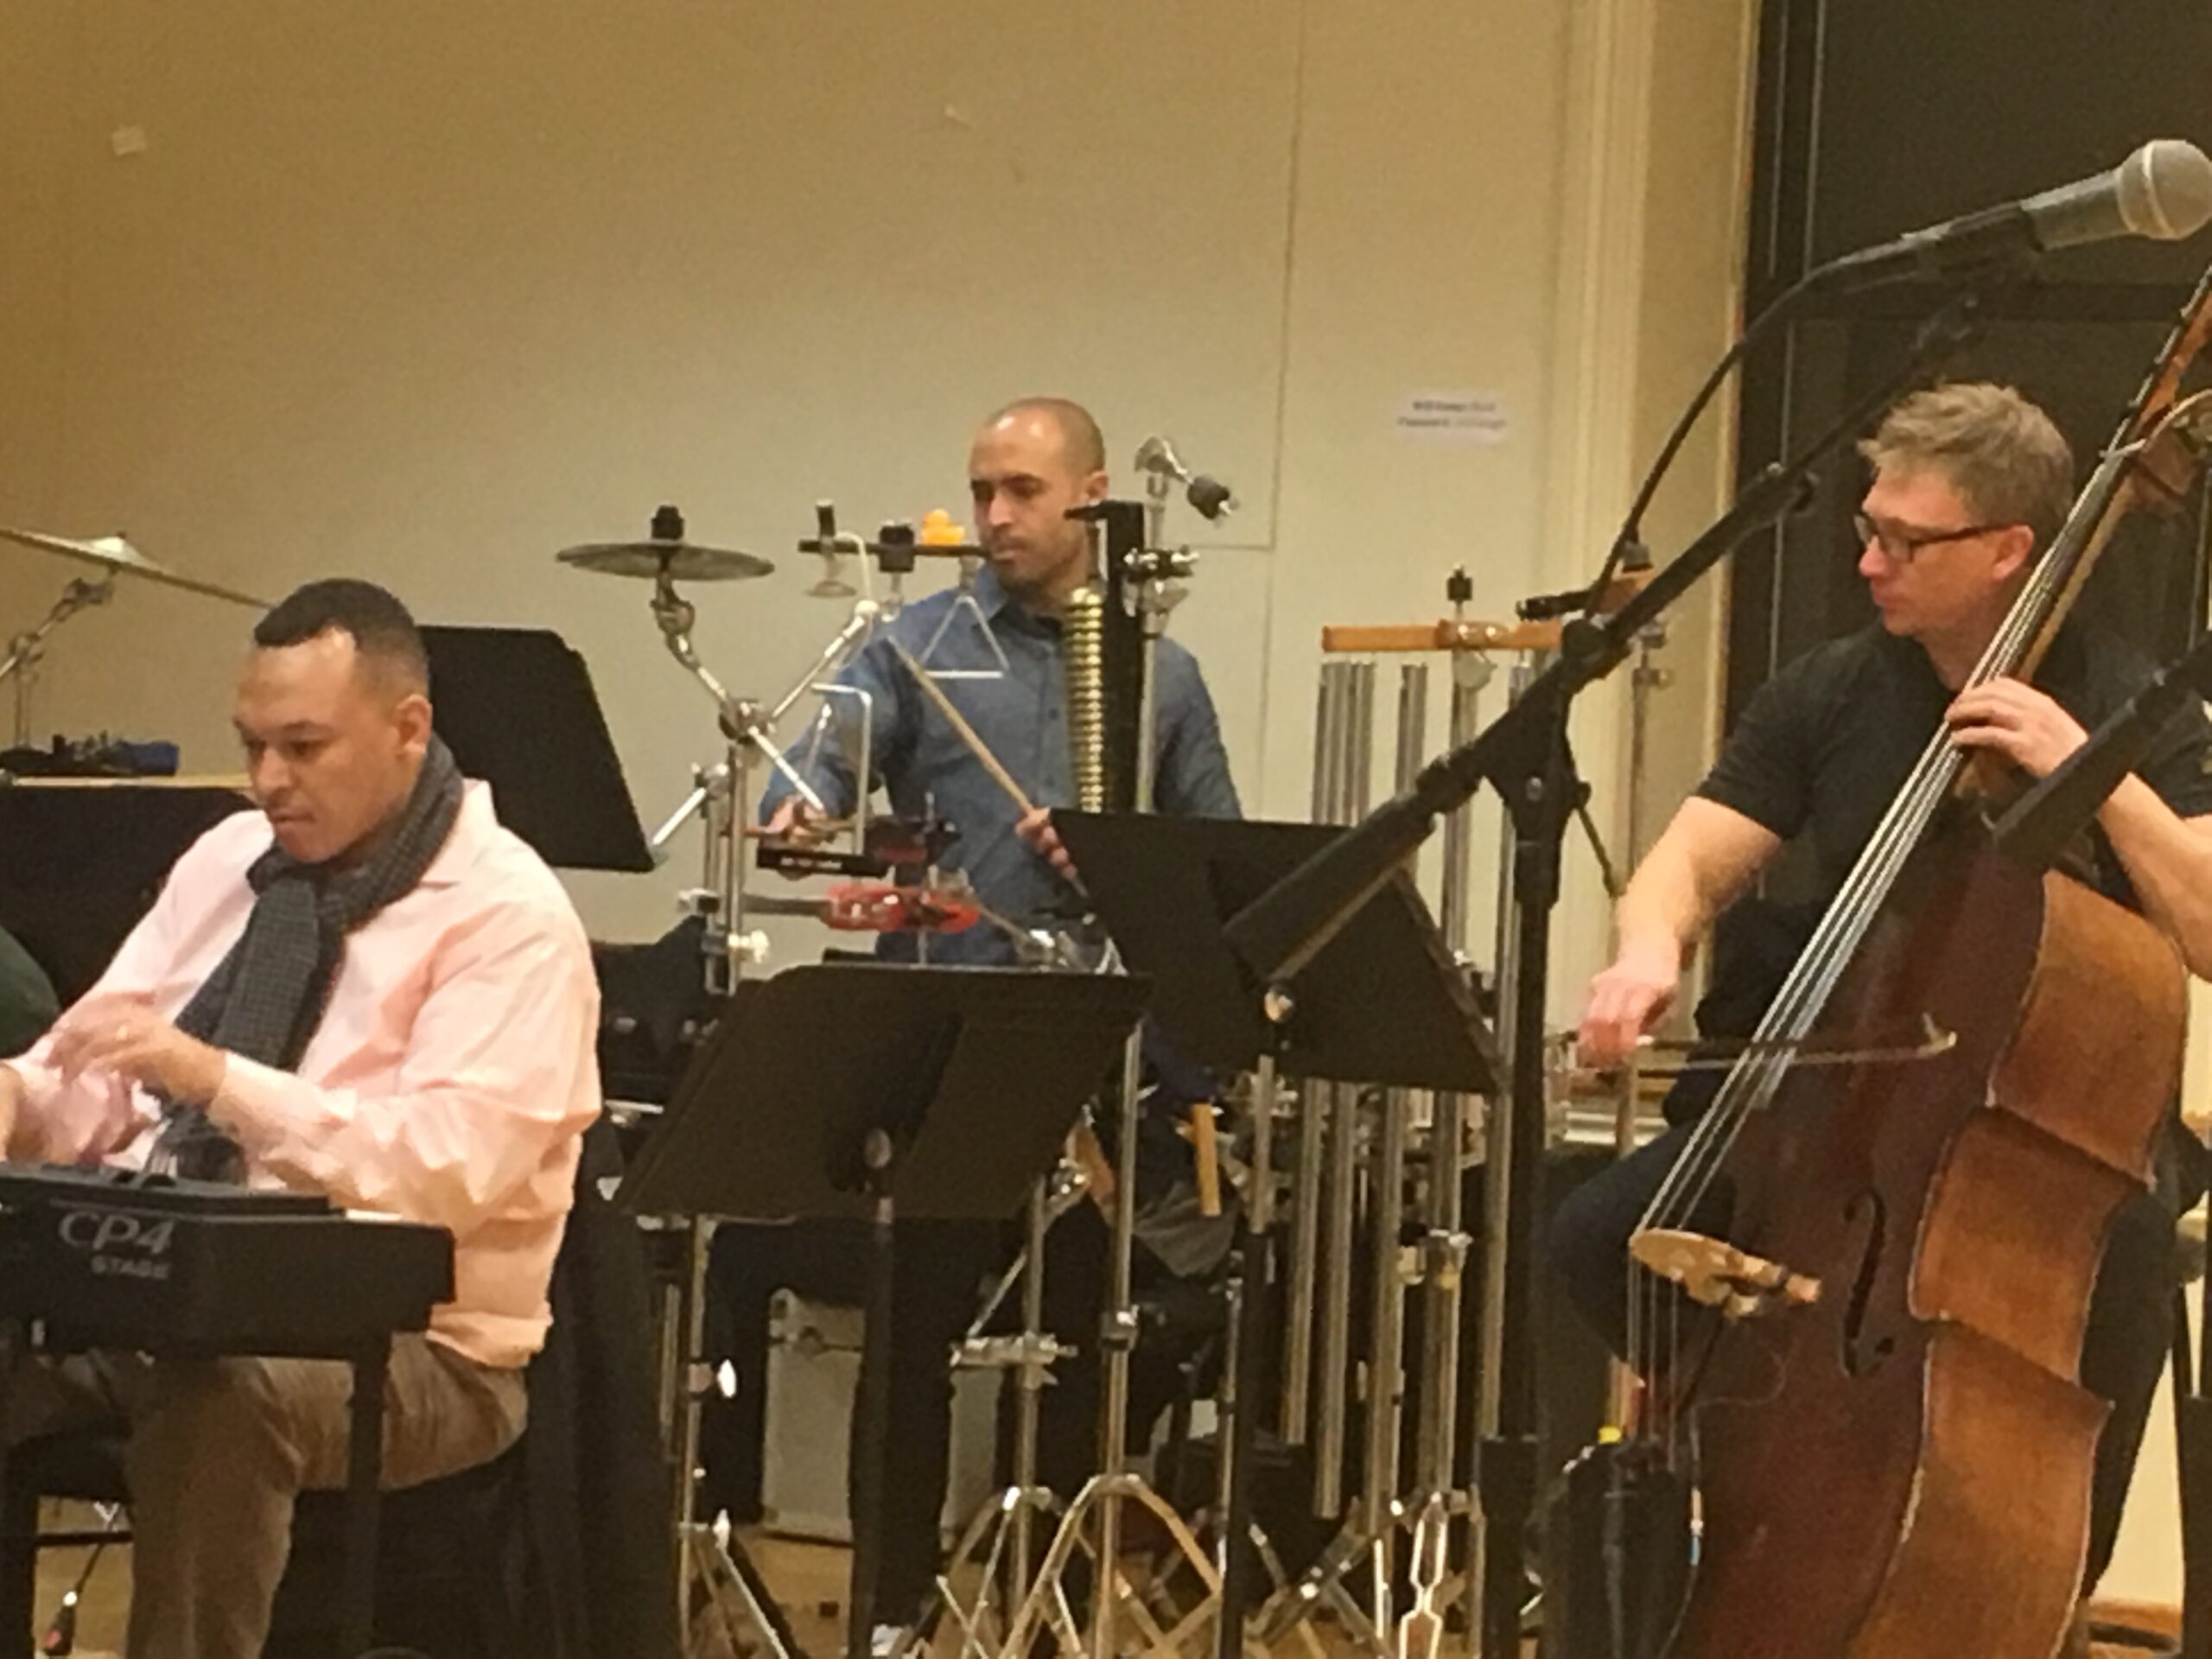 Three musicians sit behind drums and keyboards in a theatre rehearsal studio.